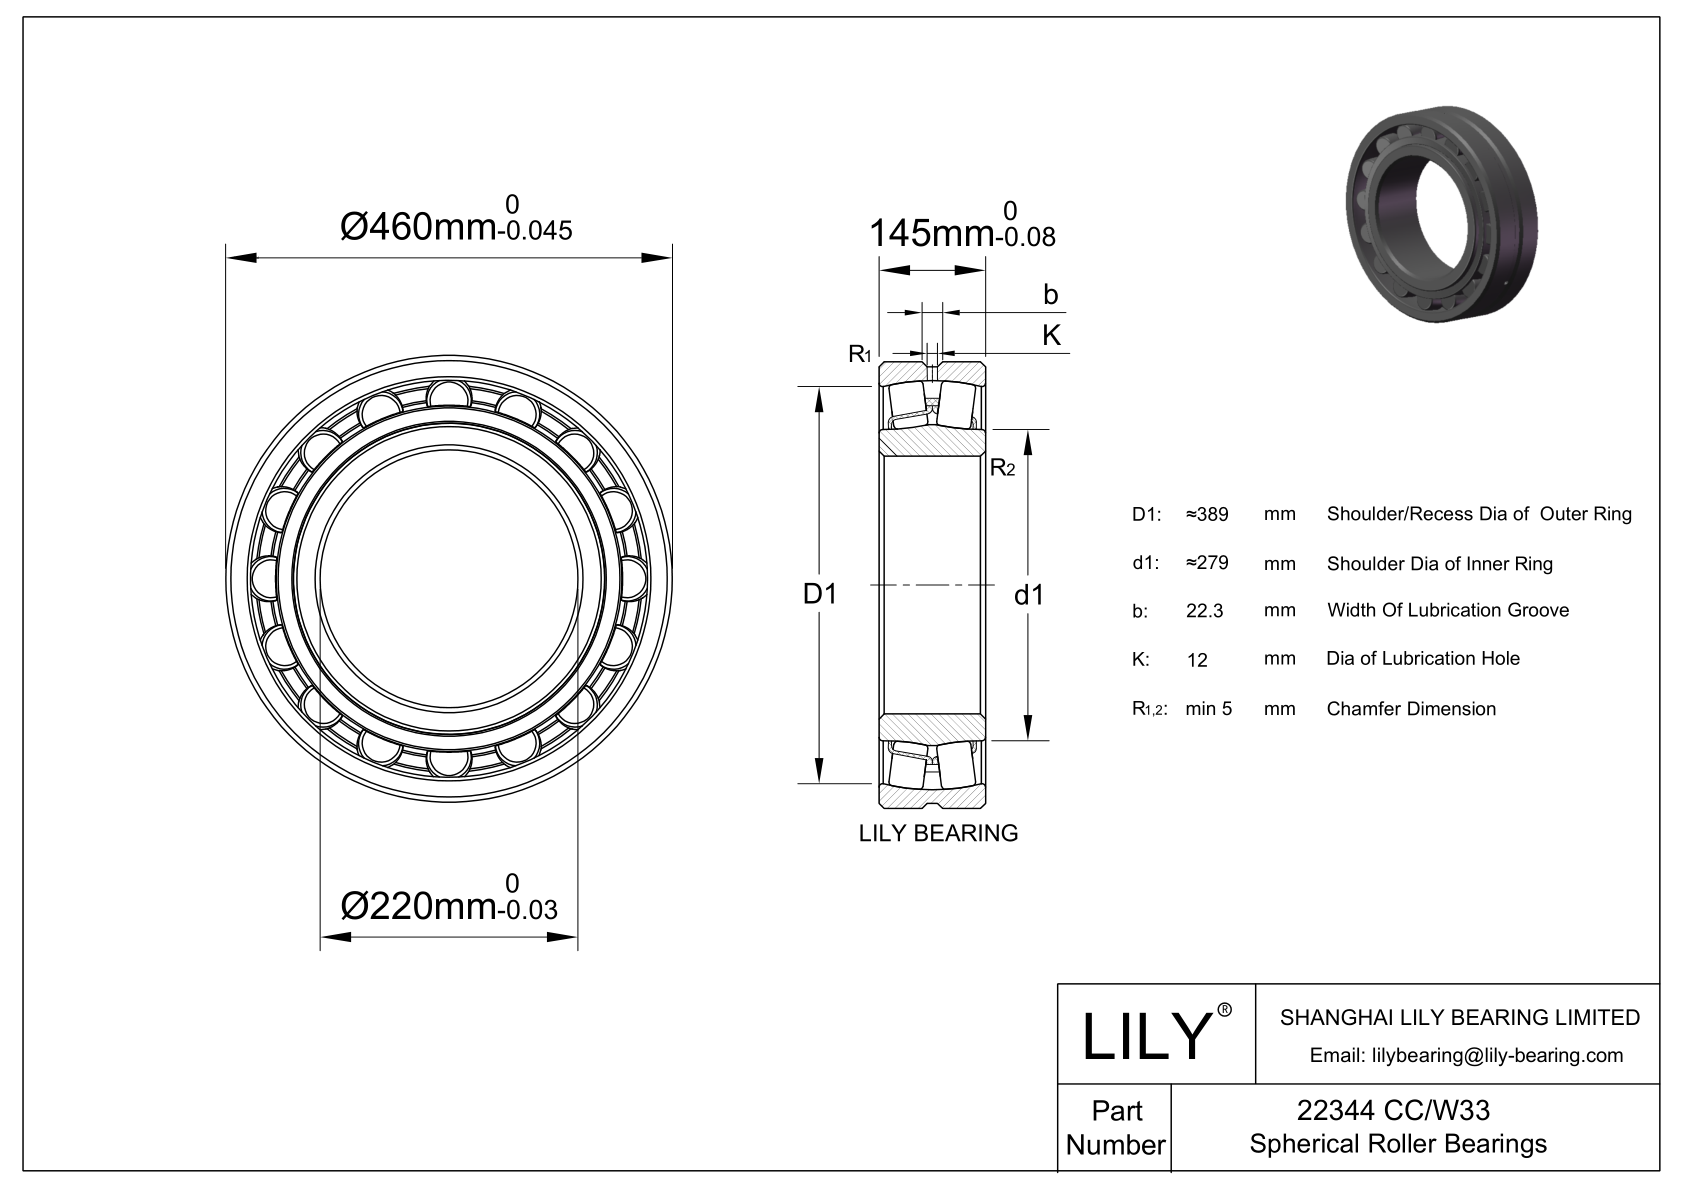 22344 CC/W33 Double Row Spherical Roller Bearing cad drawing